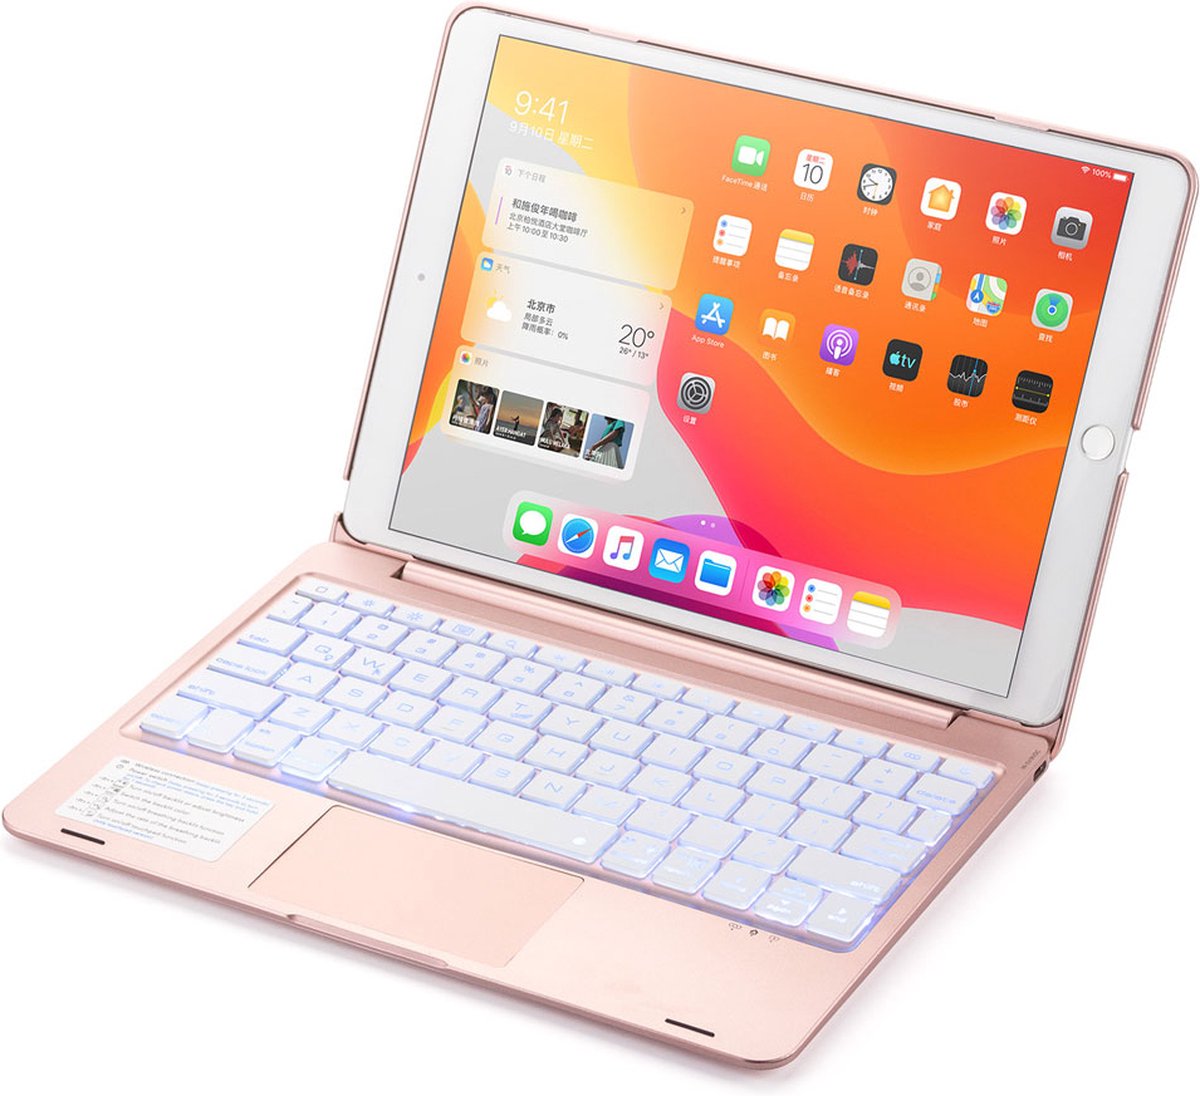 CaseBoutique Bluetooth Keyboard Case met Muis Trackpad - QWERTY indeling - Roze - Compatible met iPad 10.2 (7e/8e/9e generatie)